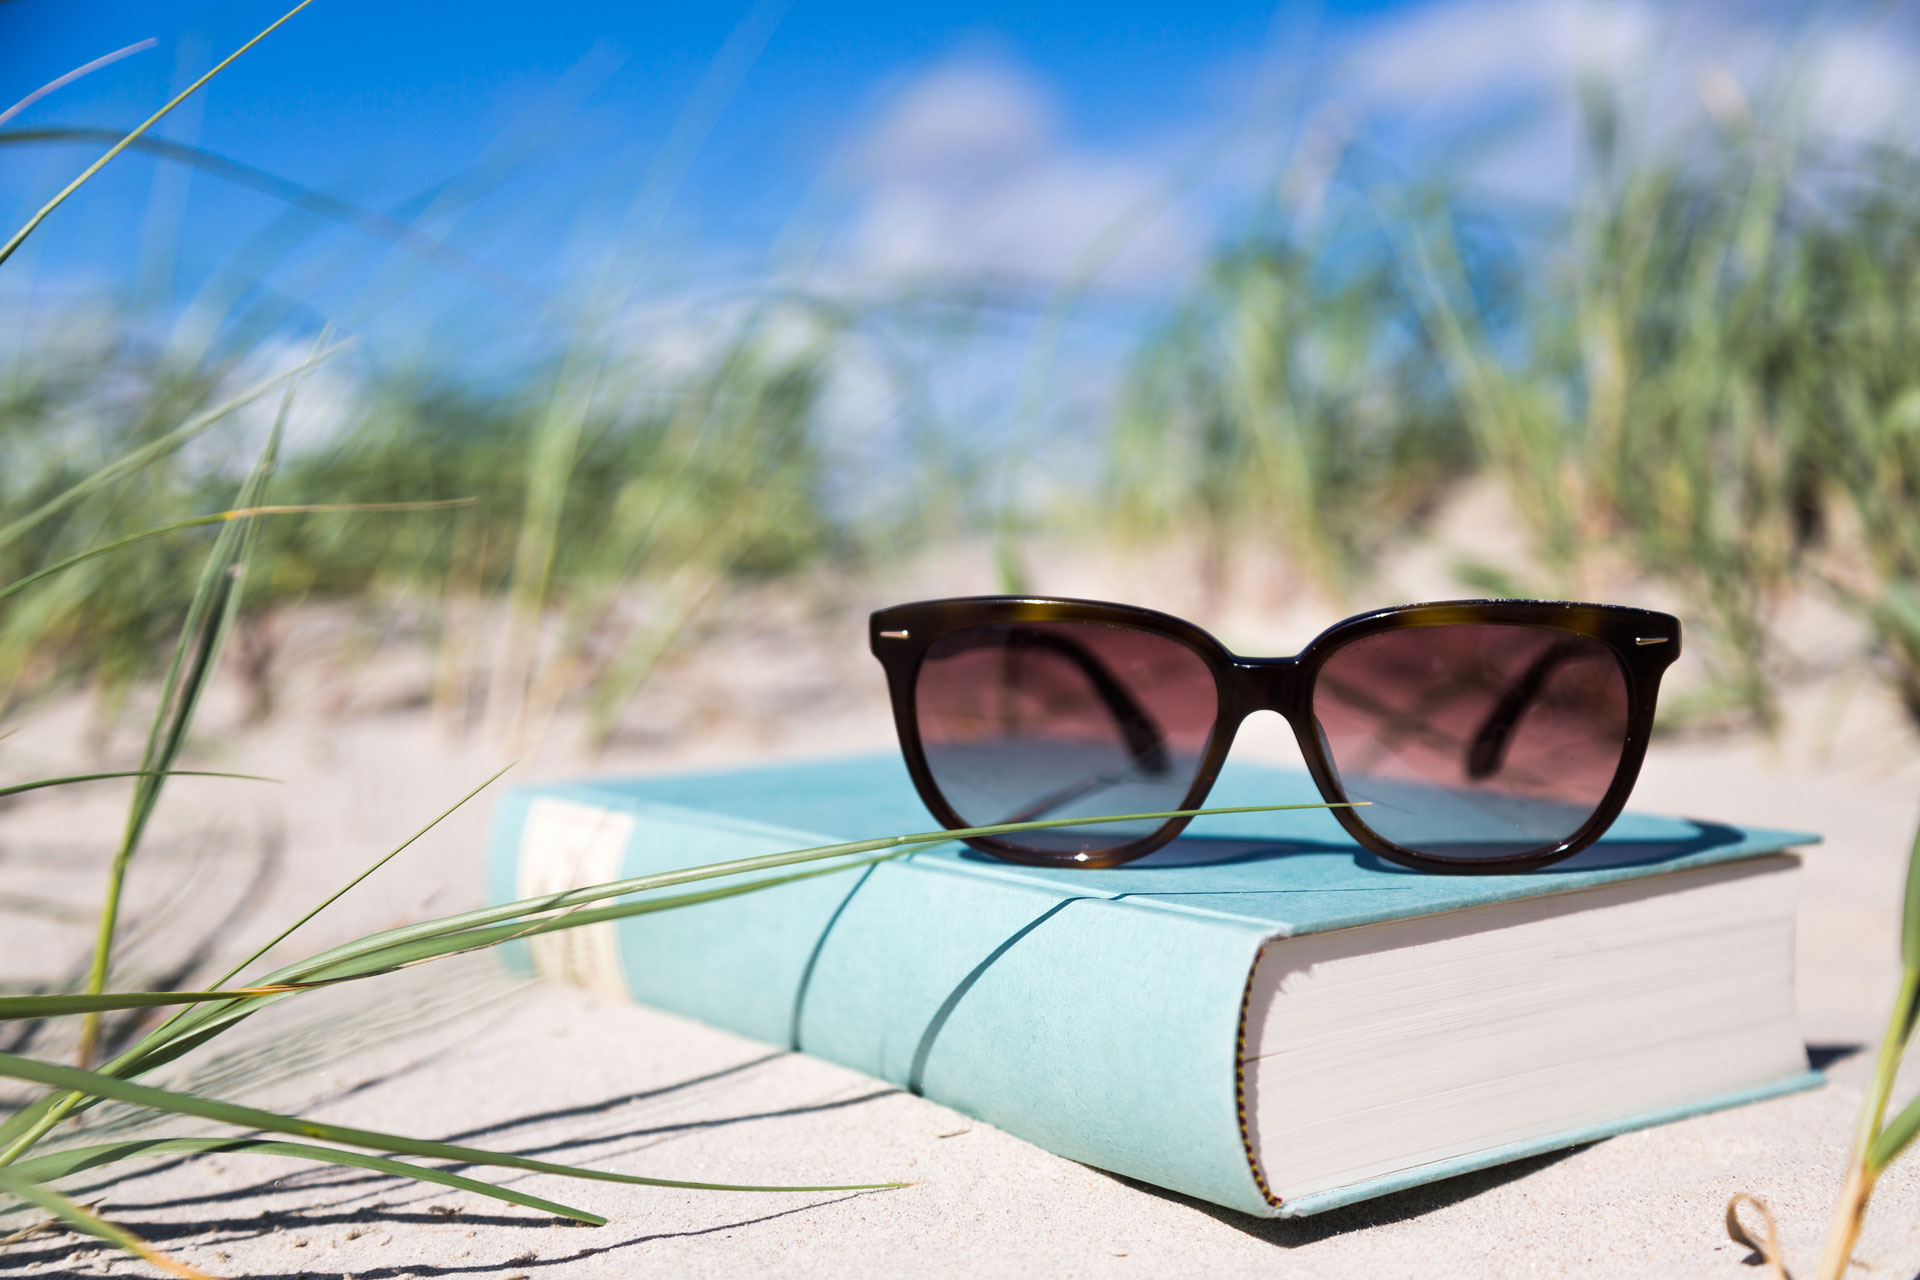 Summer Book Sales Point Up Overall | CCC's Beyond the Book